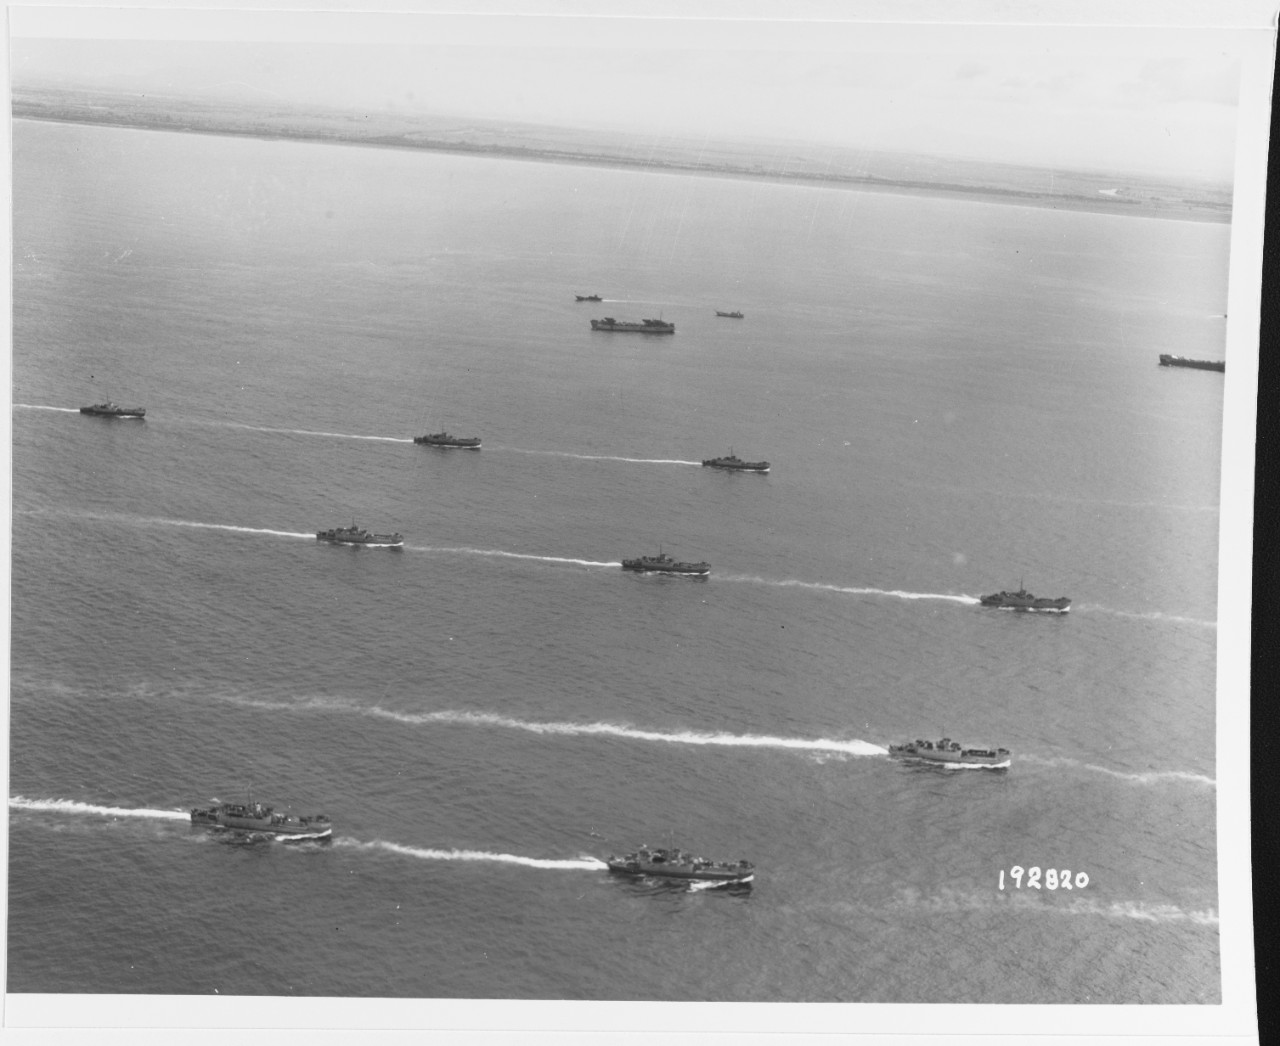 Mediterranean Invasion Rehearsals, 1944. A formation of LCIs underway during exercise "Shamrock", a practice landing of the Third Division off Formia, Italy